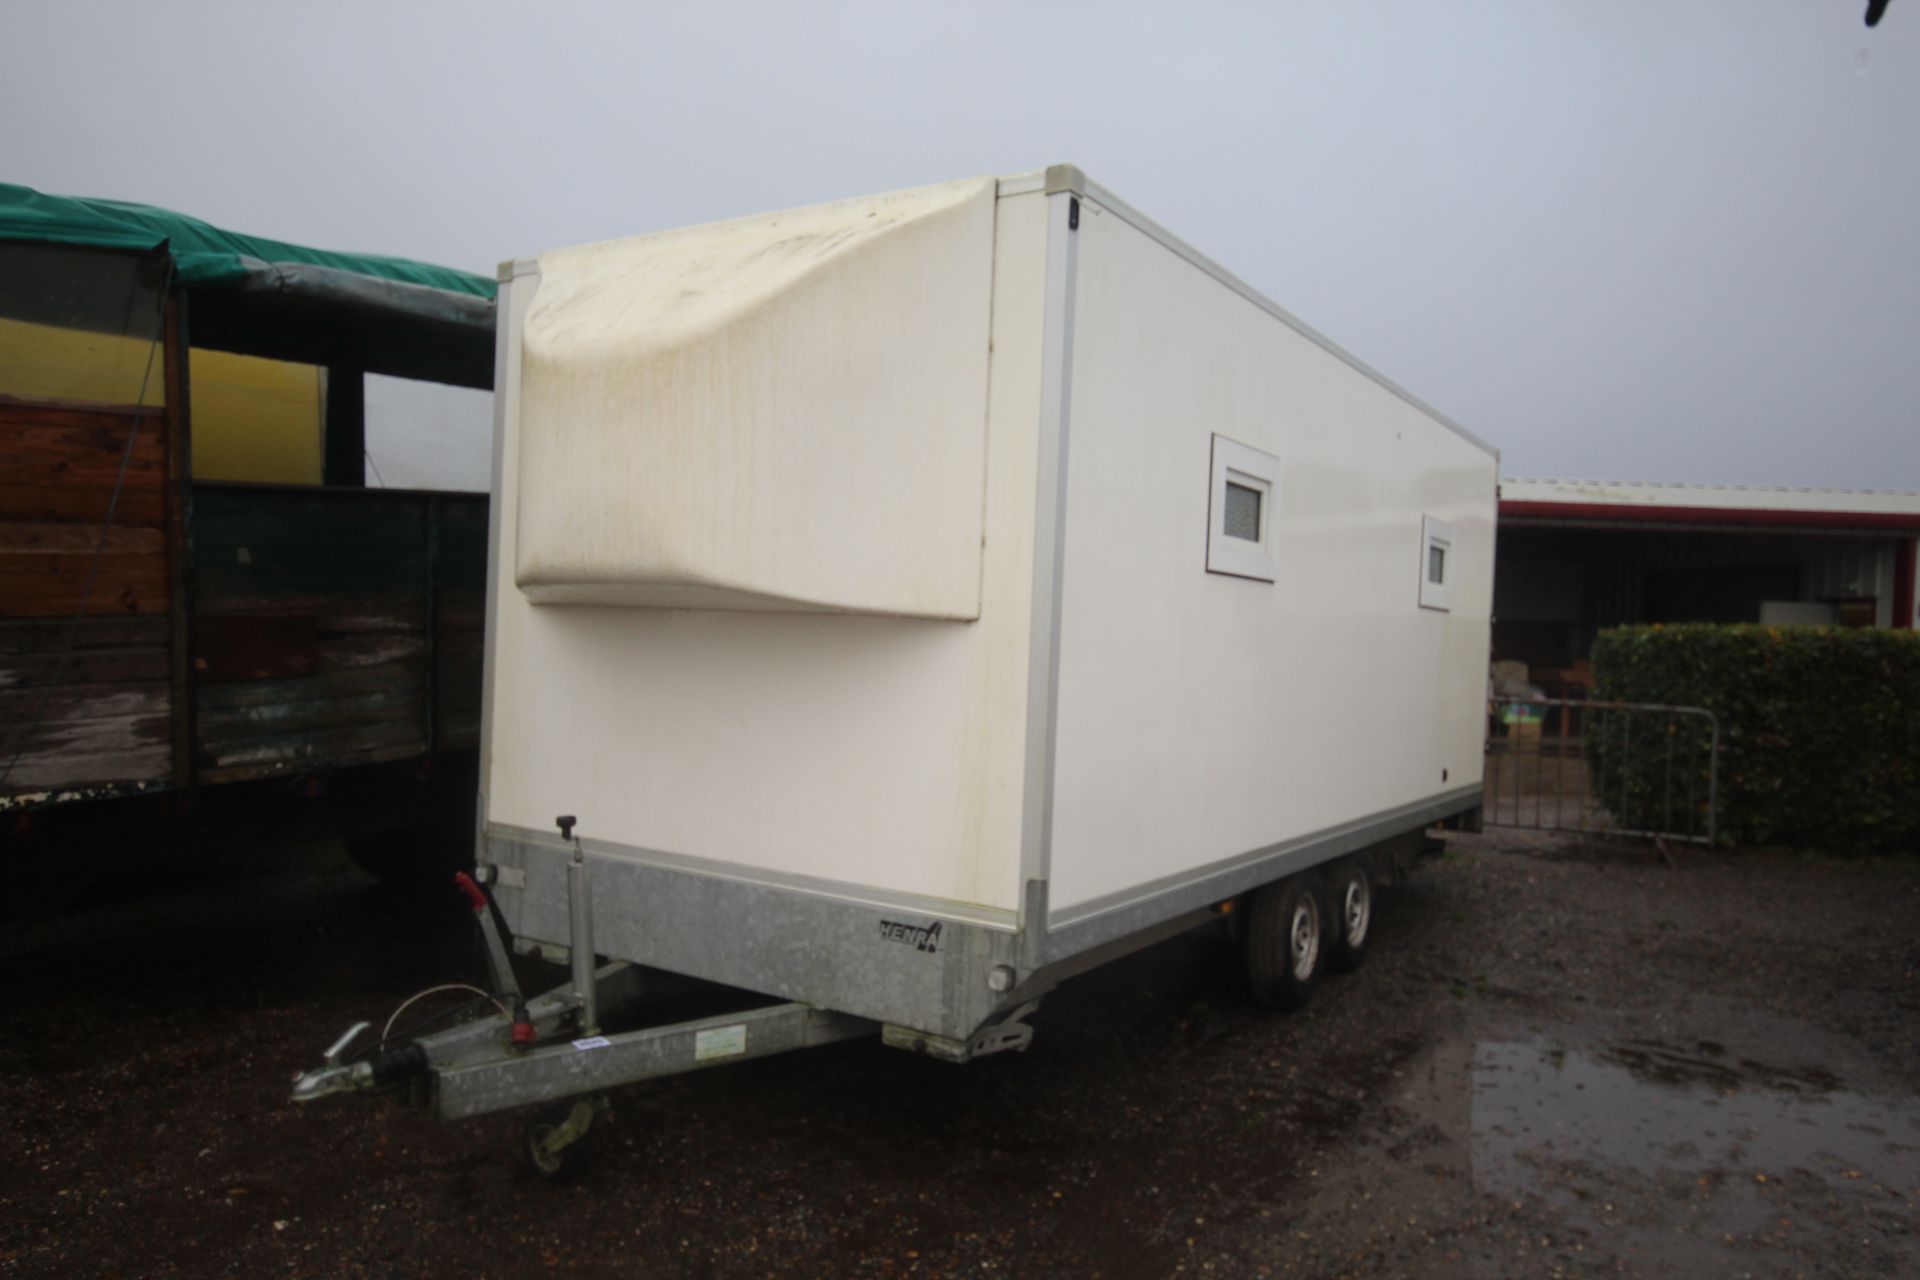 Henra 17ft 5in x 7ft 6in twin axle exhibition/ box trailer. With barn doors, side opening and